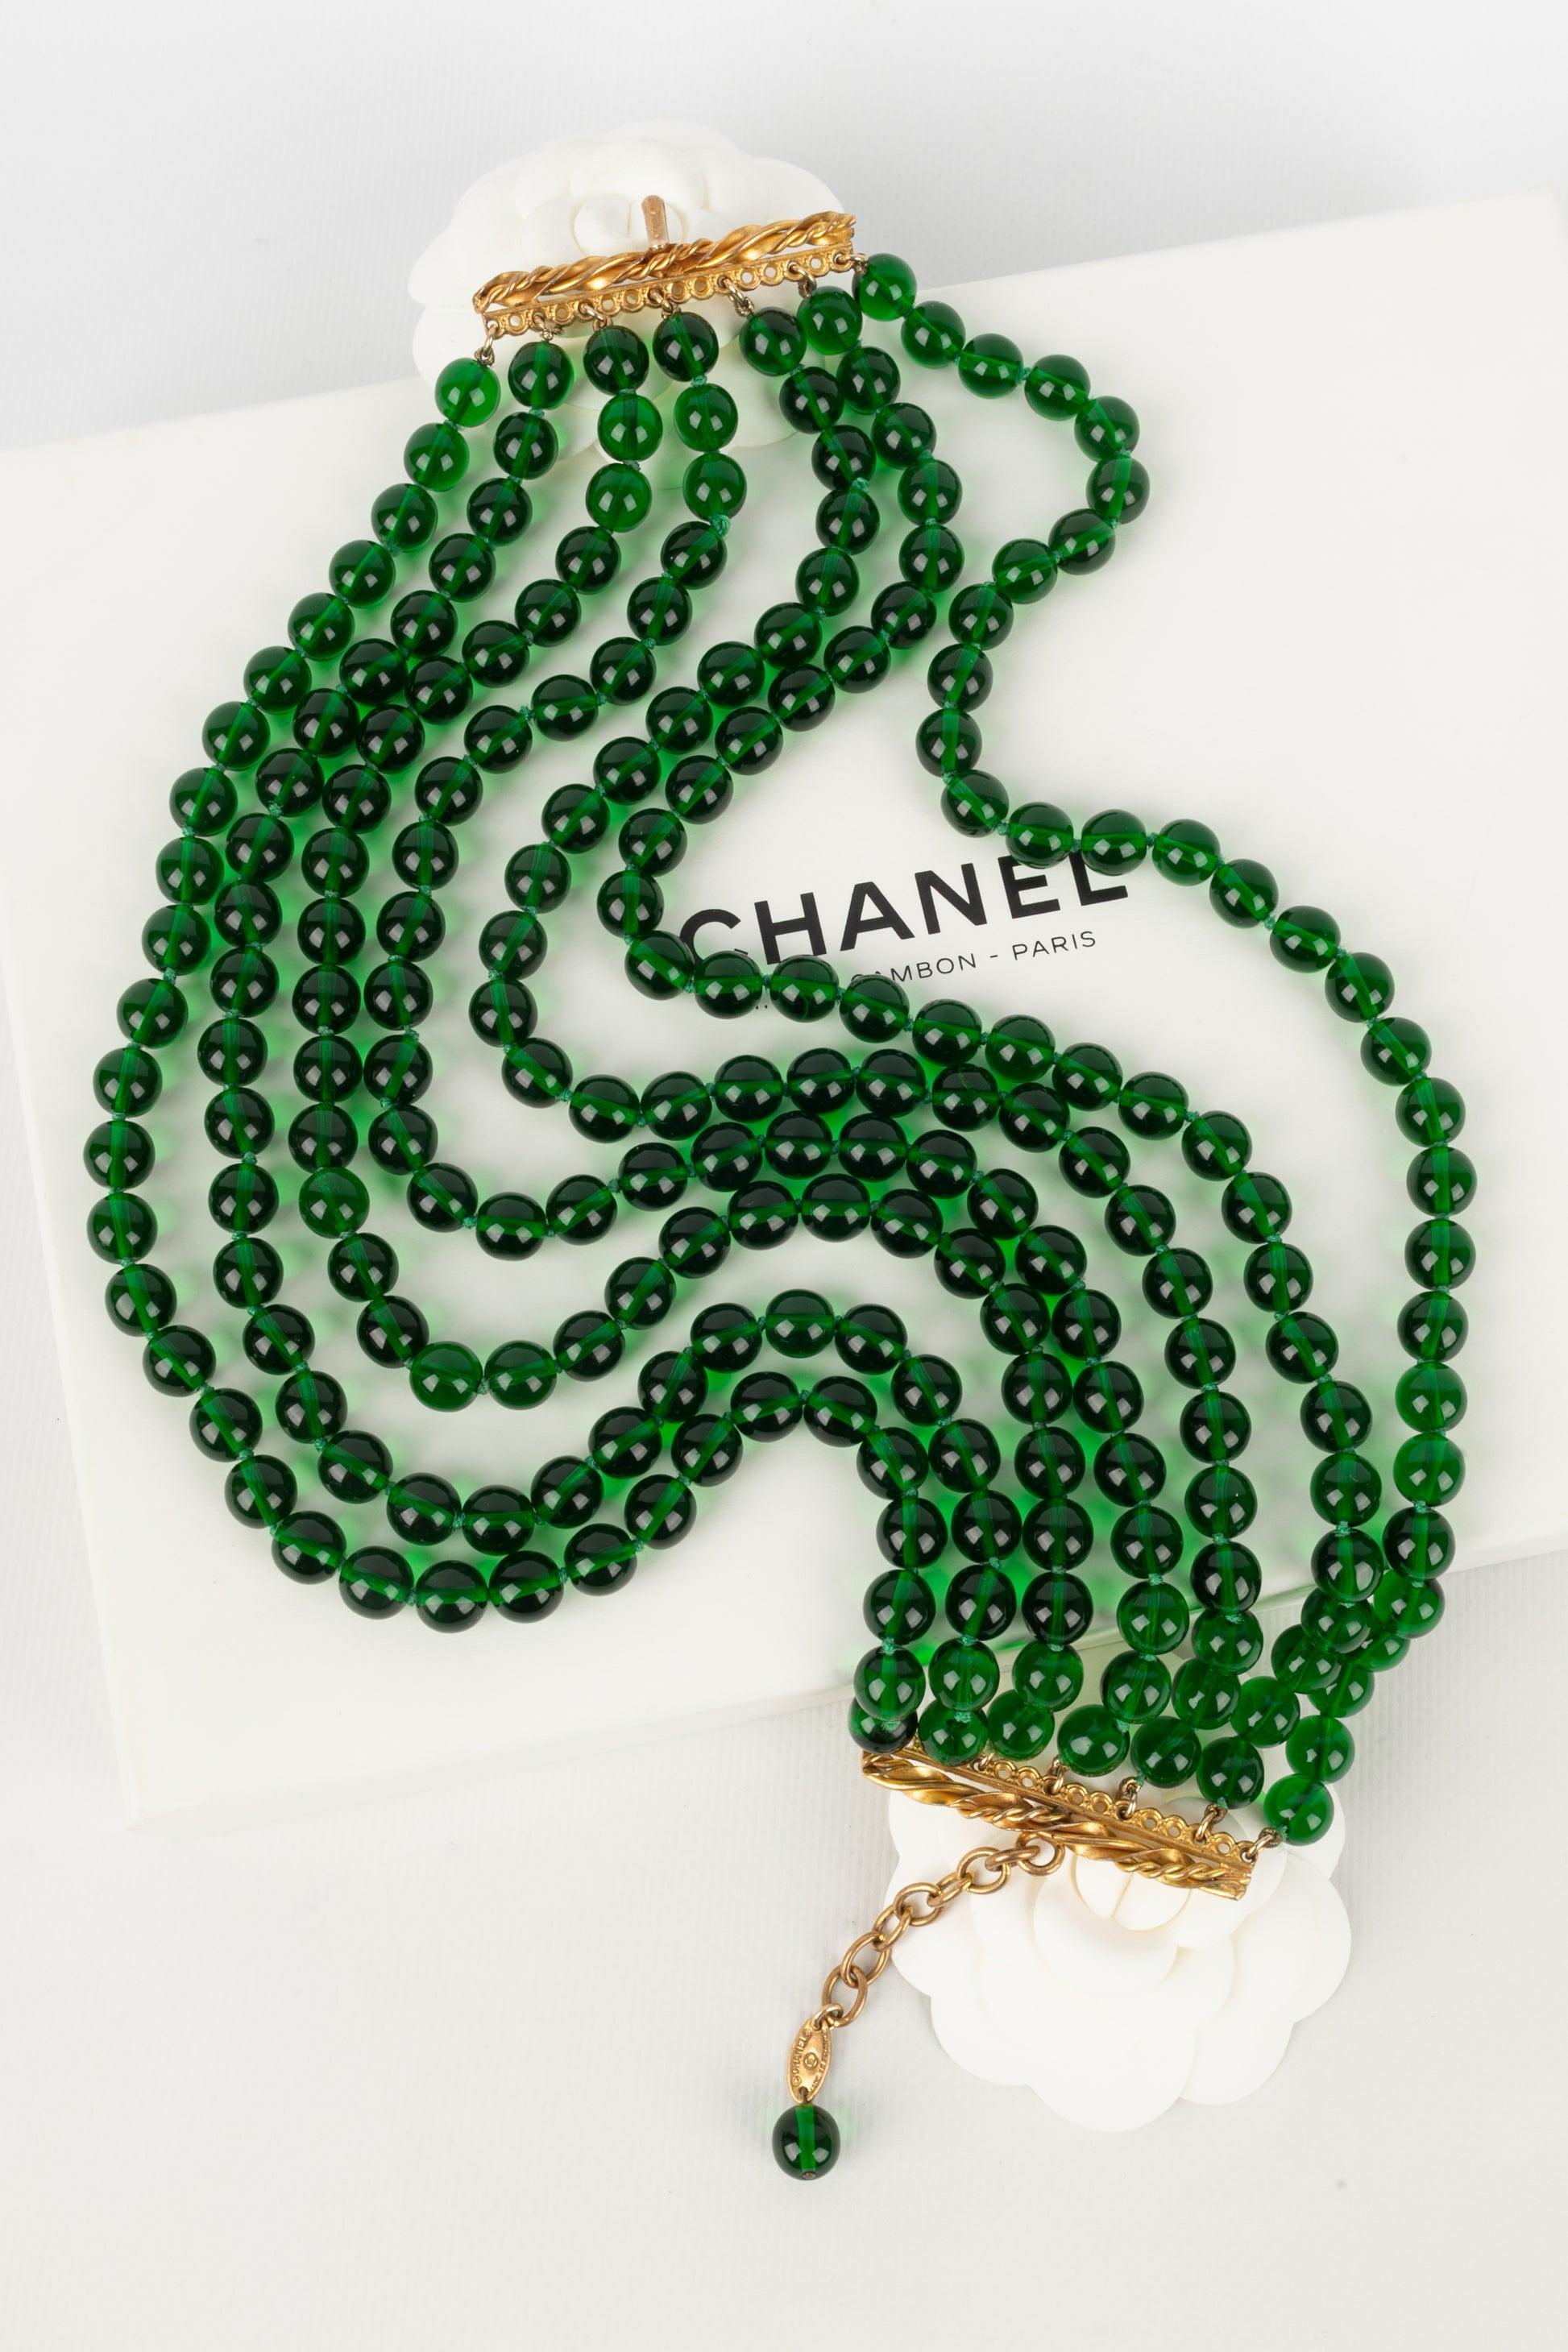 Chanel - (Made in France) Short necklace made up of several rows of green glass beads mounted in knots. Jewelry dating from the 1980s.

Additional information:
Condition: Very good condition
Dimensions: Length: 36 cm to 42 cm
Period: 20th